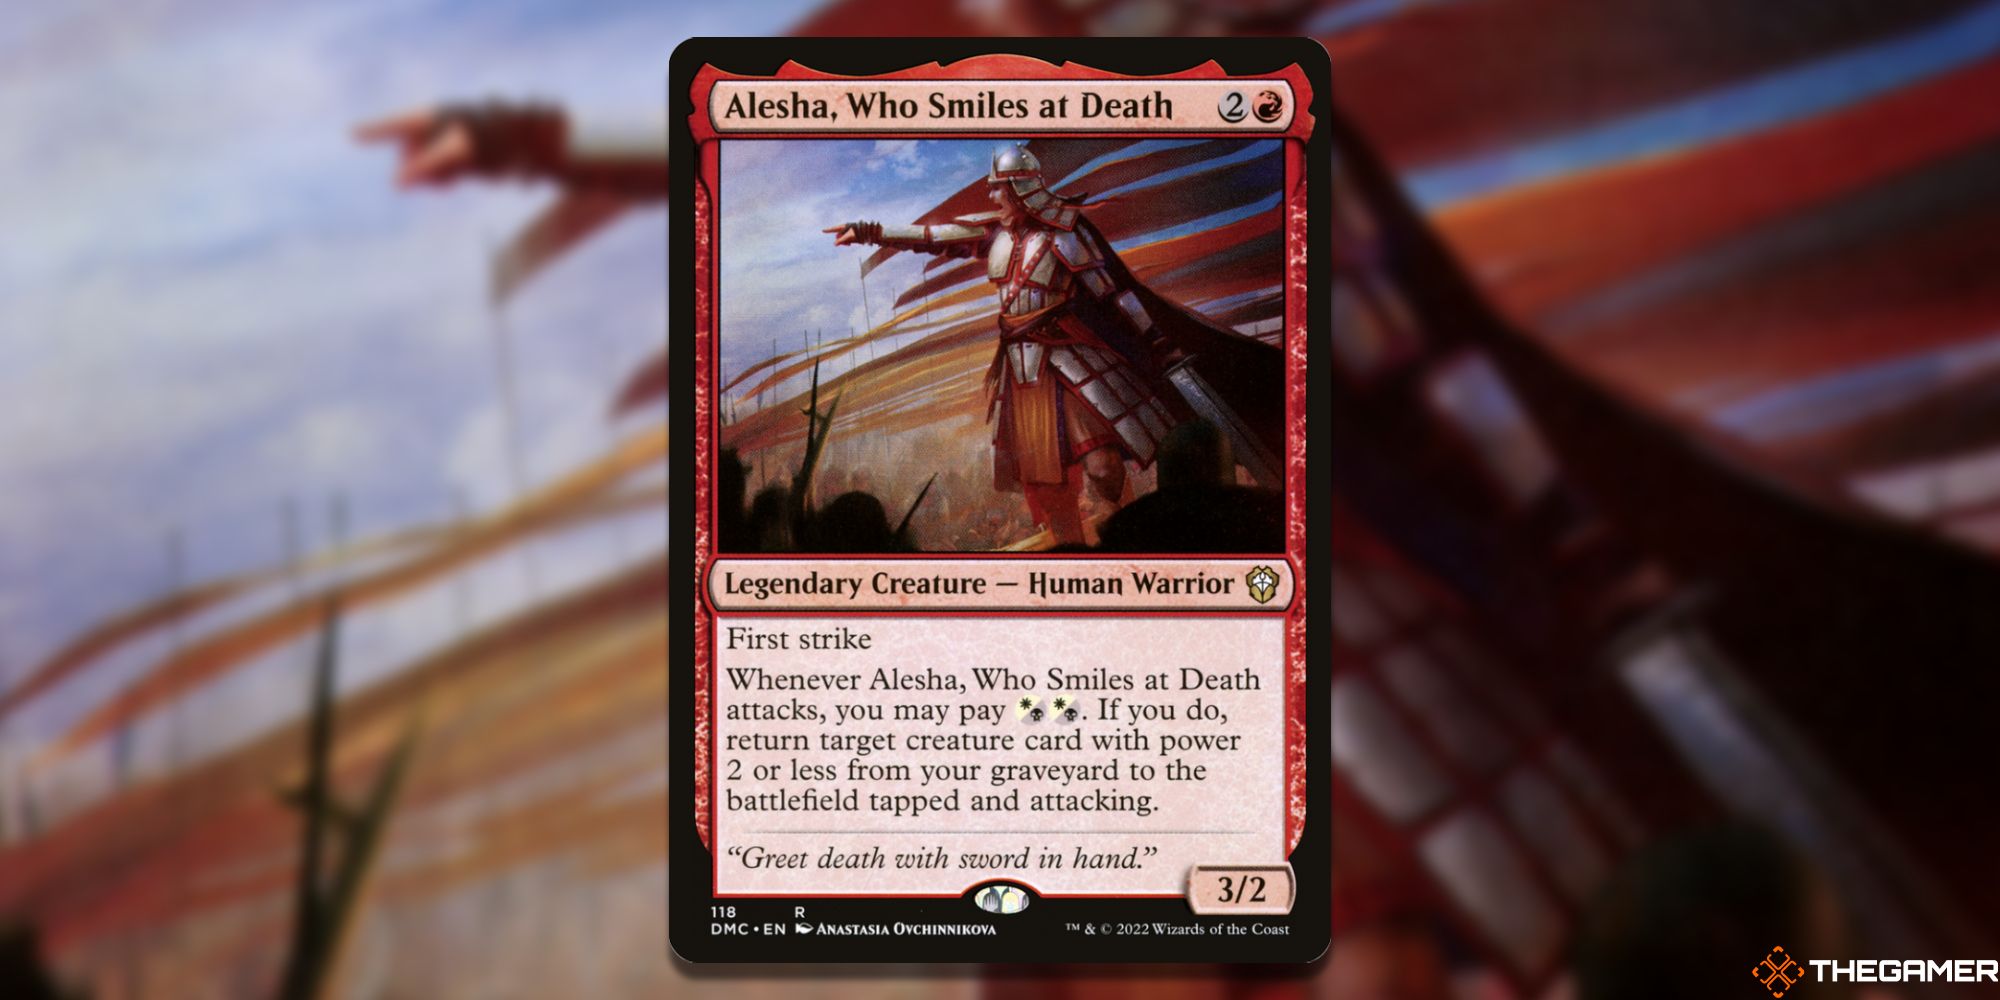 Image of the Alesha, Who Smiles at Death card in Magic: The Gathering, with art by Anastasia Ovchinnikova